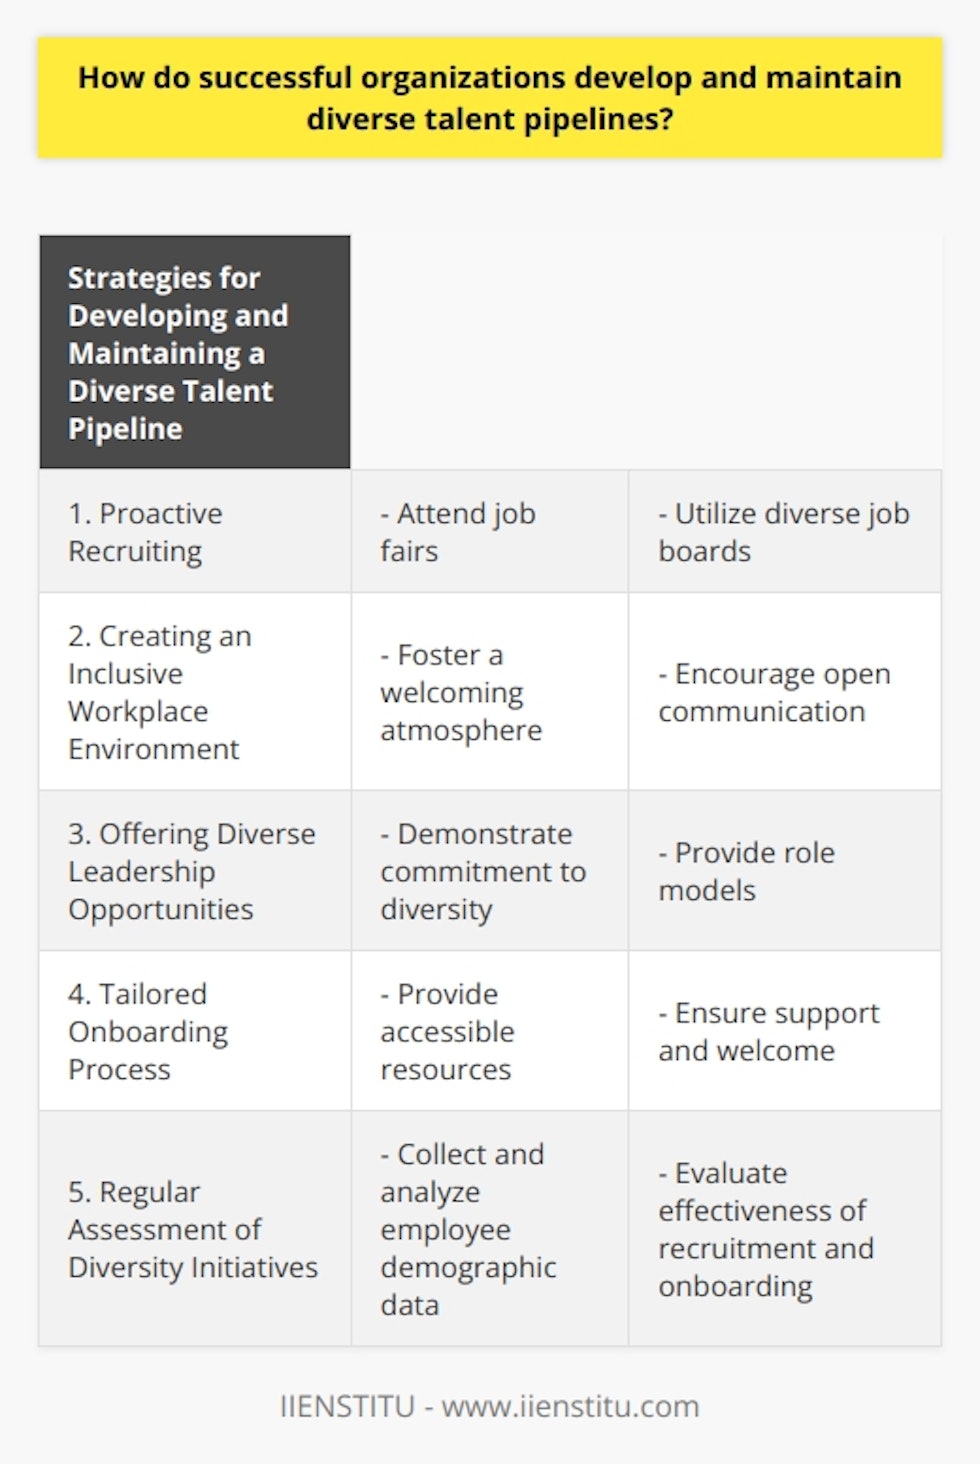 Successful organizations understand that having a diverse talent pipeline is crucial for their success in today's competitive landscape. Building and maintaining this pipeline requires various strategies to attract and retain individuals from different backgrounds and experiences. In this article, we will explore some of the key practices organizations can implement to develop and sustain a diverse talent pipeline.Proactive recruiting is one of the most important steps in building a diverse talent pipeline. Organizations should actively seek out candidates from diverse backgrounds by attending multiple job fairs and utilizing diverse job boards. By expanding their recruiting efforts, organizations can ensure that they are attracting a wide range of potential hires.In addition to proactive recruiting, it is crucial for organizations to create an inclusive workplace environment that is attractive to diverse talent. This can be achieved by fostering a welcoming atmosphere where employees feel comfortable and valued. Open communication and listening to employee concerns and feedback are essential in creating an inclusive environment. Furthermore, offering diverse leadership opportunities demonstrates the organization's commitment to diversity and provides role models for employees from various backgrounds.Another critical aspect of developing a diverse talent pipeline is having an effective onboarding process. Organizations should tailor their onboarding process to meet the needs of employees from different backgrounds. This includes providing accessible resources and ensuring that everyone feels supported and welcomed. A comprehensive onboarding process helps employees of diverse backgrounds feel more comfortable and increases their chances of success in their new roles.Regular assessment of diversity initiatives is necessary to ensure they have the desired impact. Collecting and analyzing employee demographic data, evaluating the effectiveness of recruitment and onboarding processes, and seeking feedback from various stakeholders can help organizations gauge the success of their efforts. This ongoing review demonstrates the organization's commitment to creating a diverse and inclusive workplace.In conclusion, successful organizations understand the importance of a diverse talent pipeline and actively work to develop and maintain it. By engaging in proactive recruiting, creating an inclusive workplace environment, implementing effective onboarding processes, and regularly assessing diversity initiatives, organizations can attract and retain individuals from diverse backgrounds. This commitment to diversity and inclusion not only helps organizations stay ahead of the competition but also positively impacts employee morale, engagement, and overall company performance.